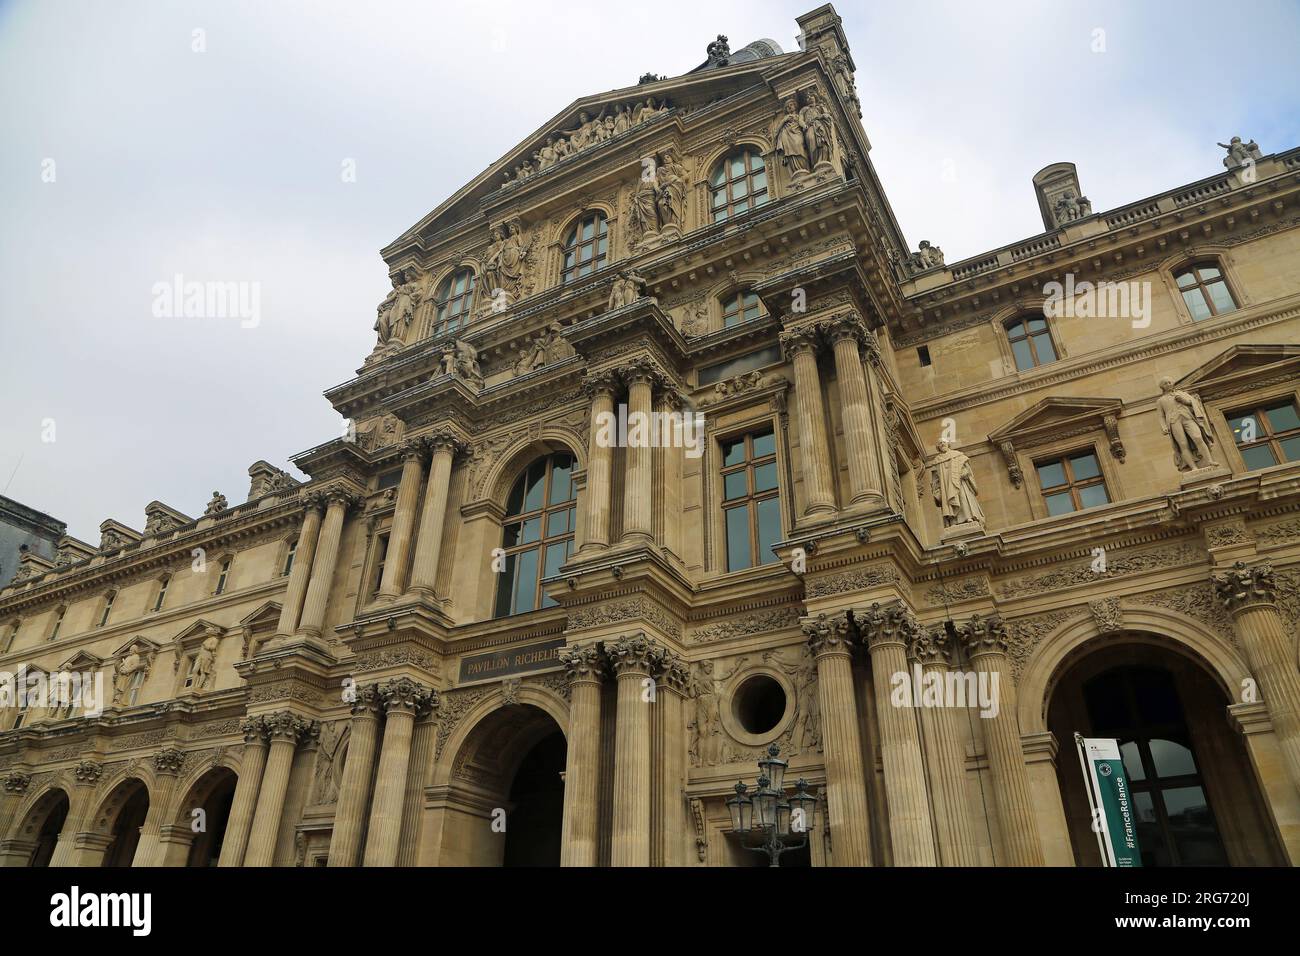 View at the inner facade - The Louvre - Paris, France Stock Photo